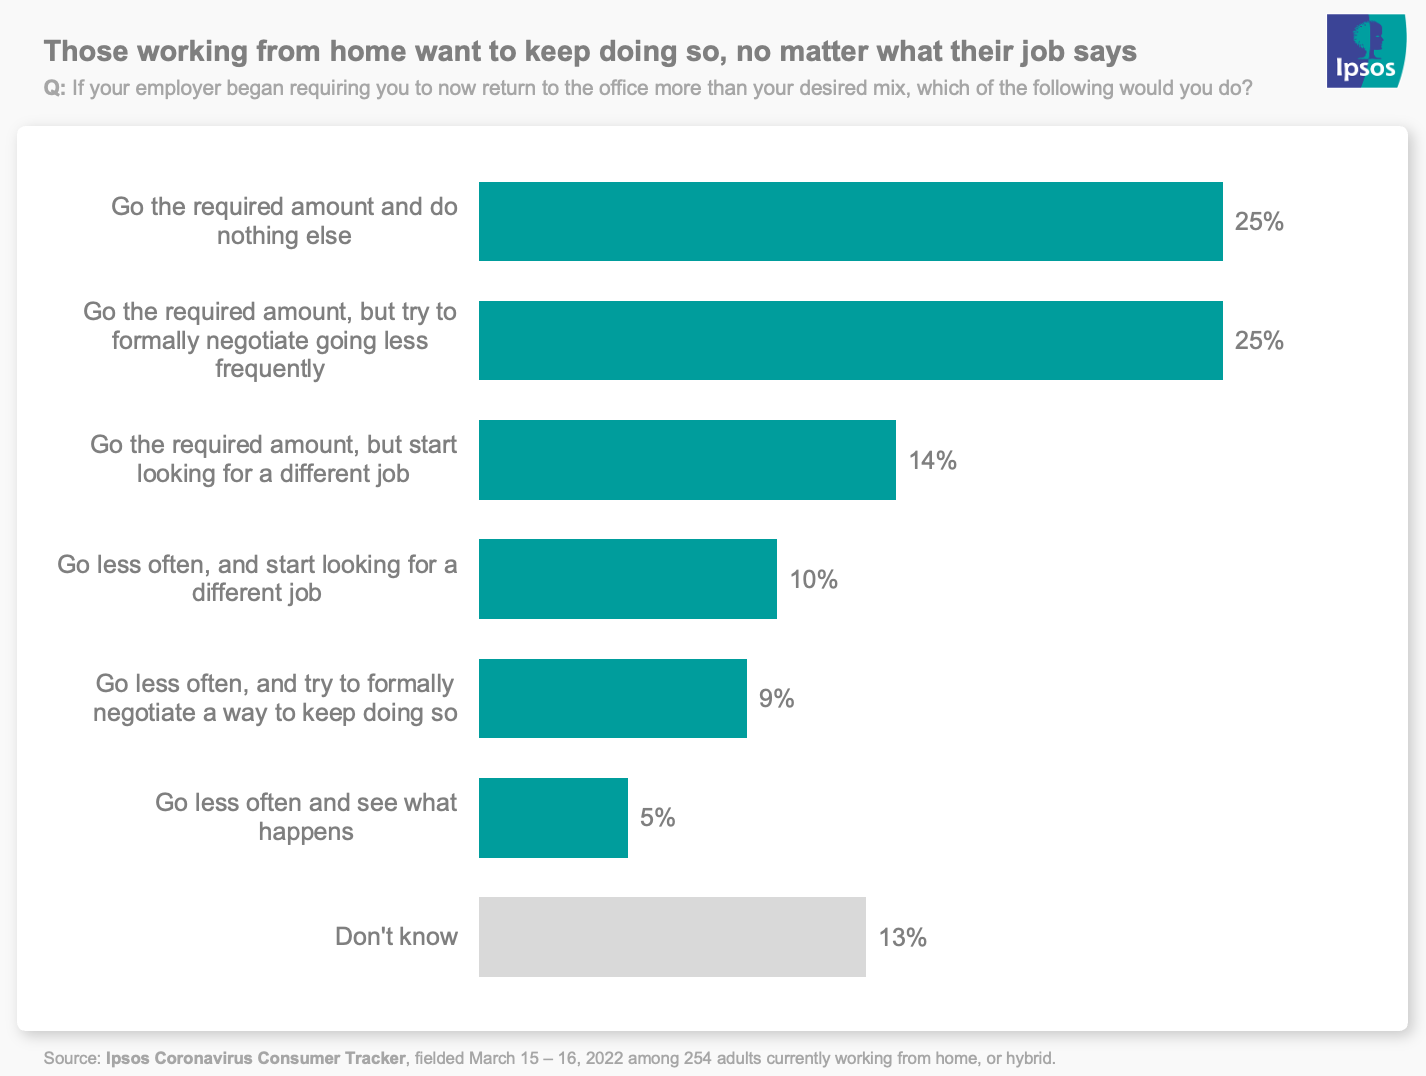 People want to keep working from home